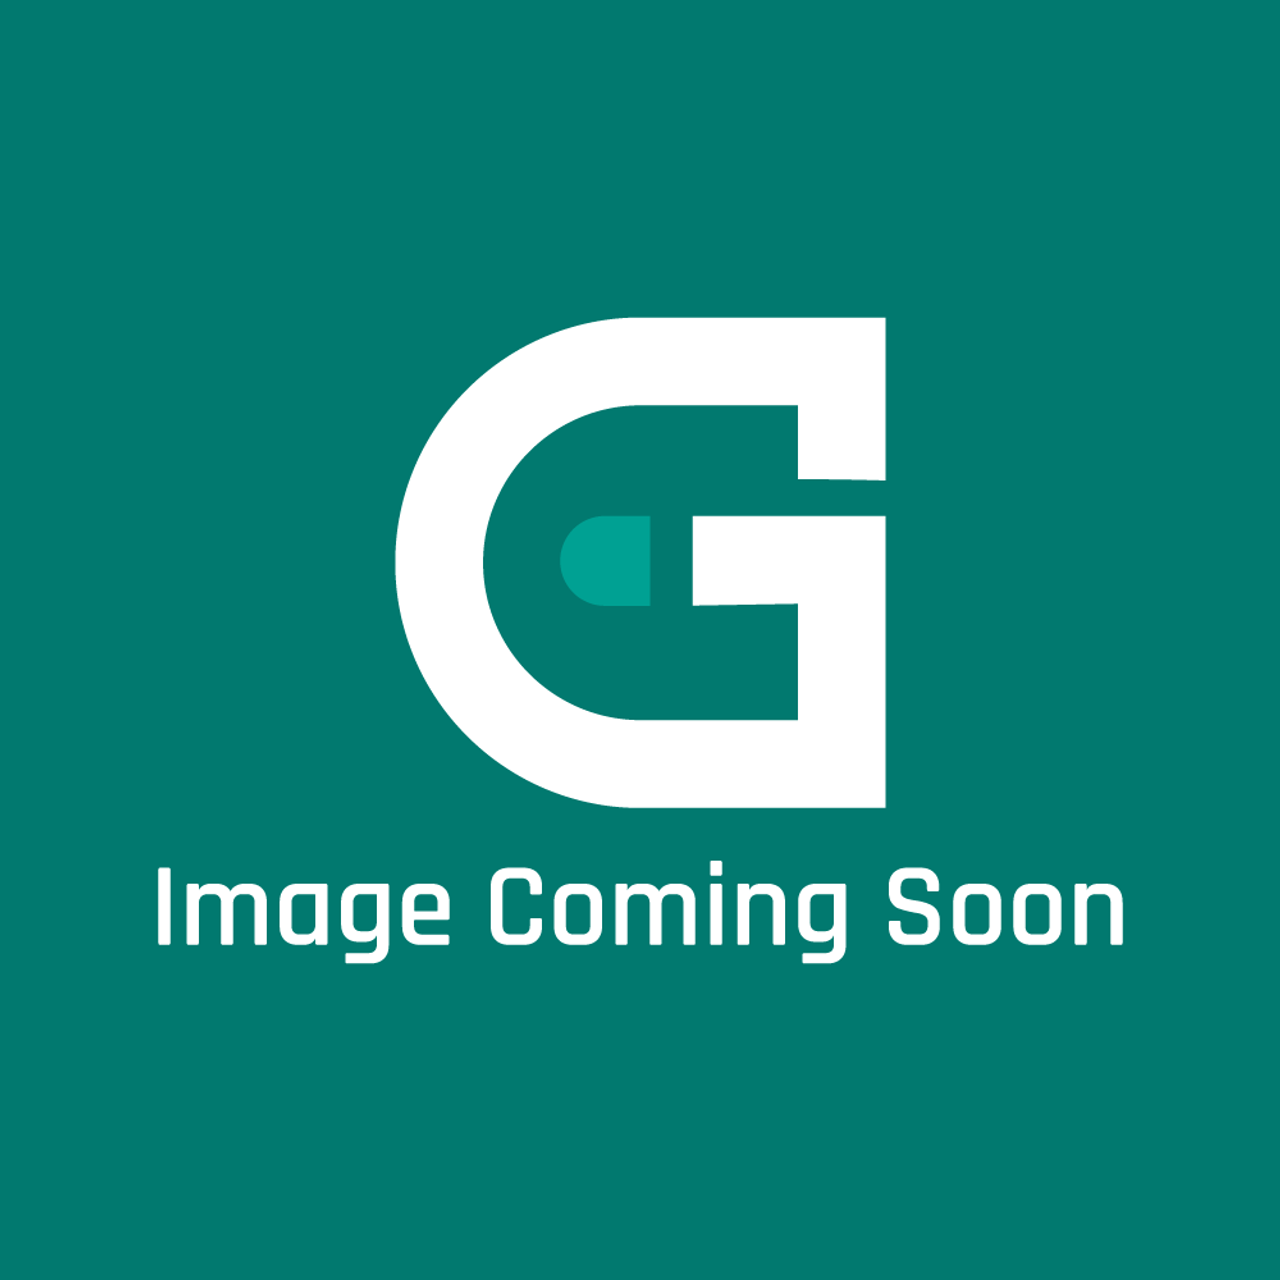 GE Appliances WR74X24665 - Grill Asm Euro Lh Sd/Bm - Image Coming Soon!